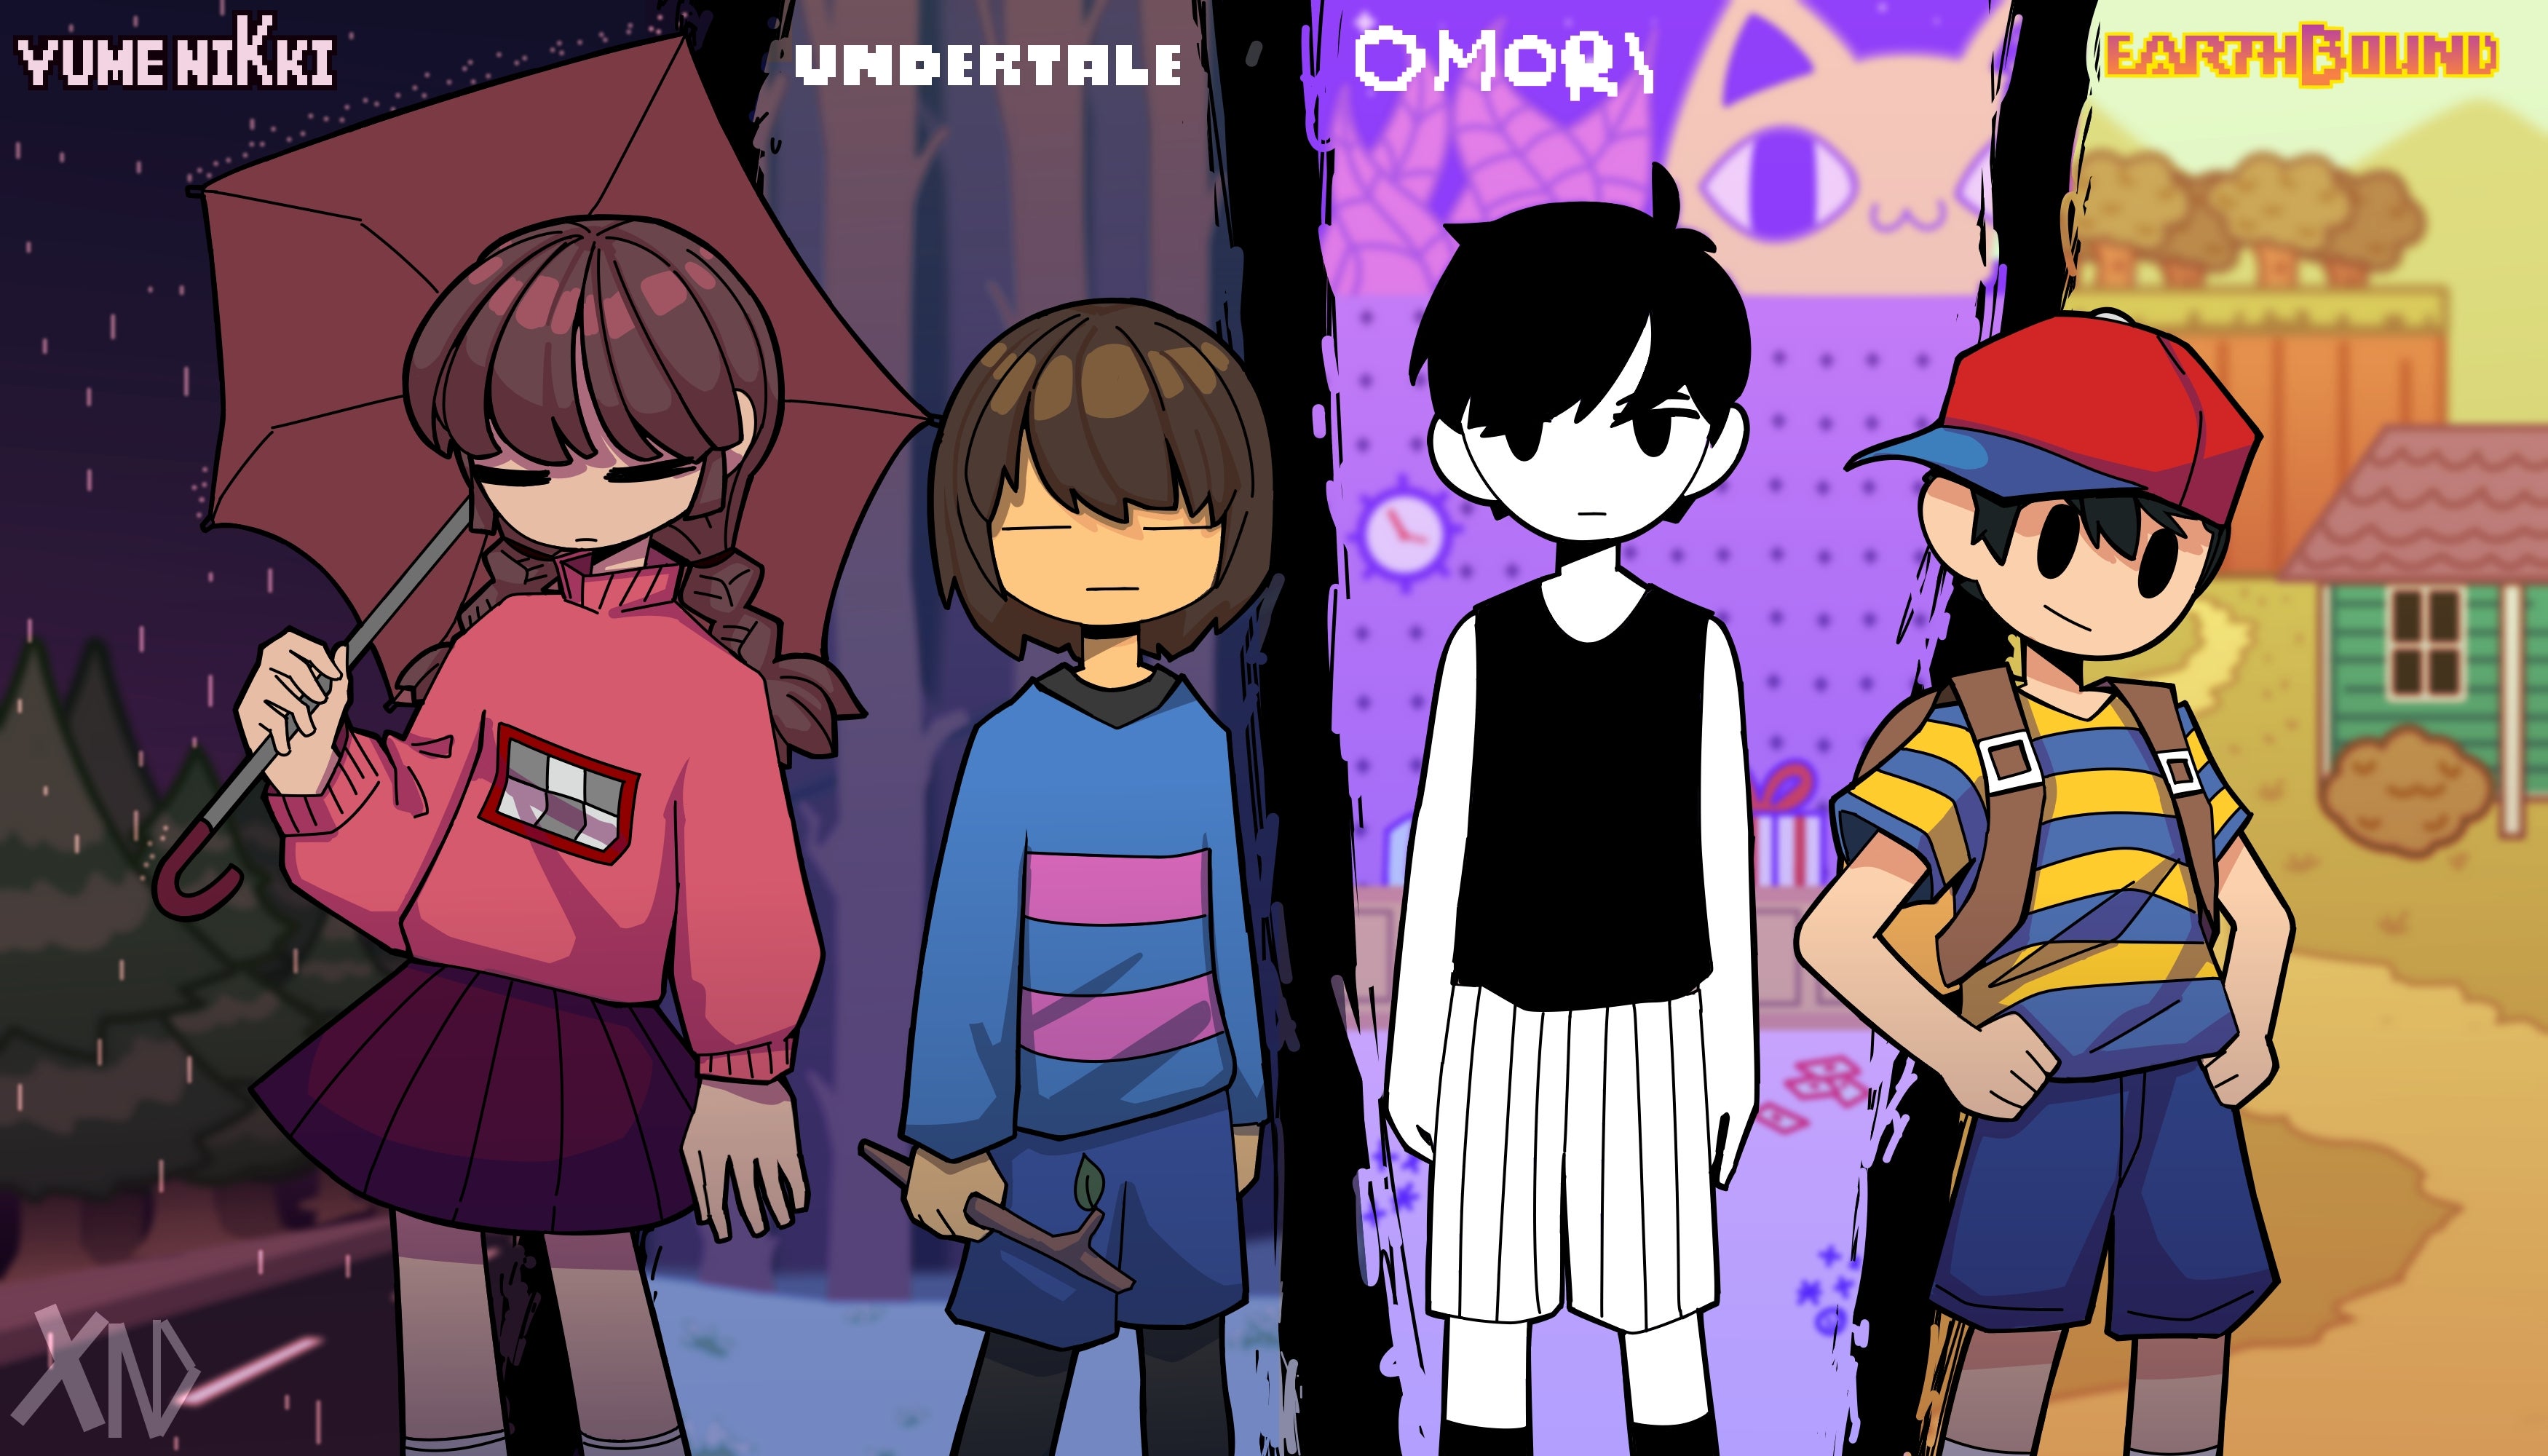 Undertale Earthbound Yume Nikki Omori Video Game Omori Character Frisk Undertale Ness Earthbound Mad 3500x2000